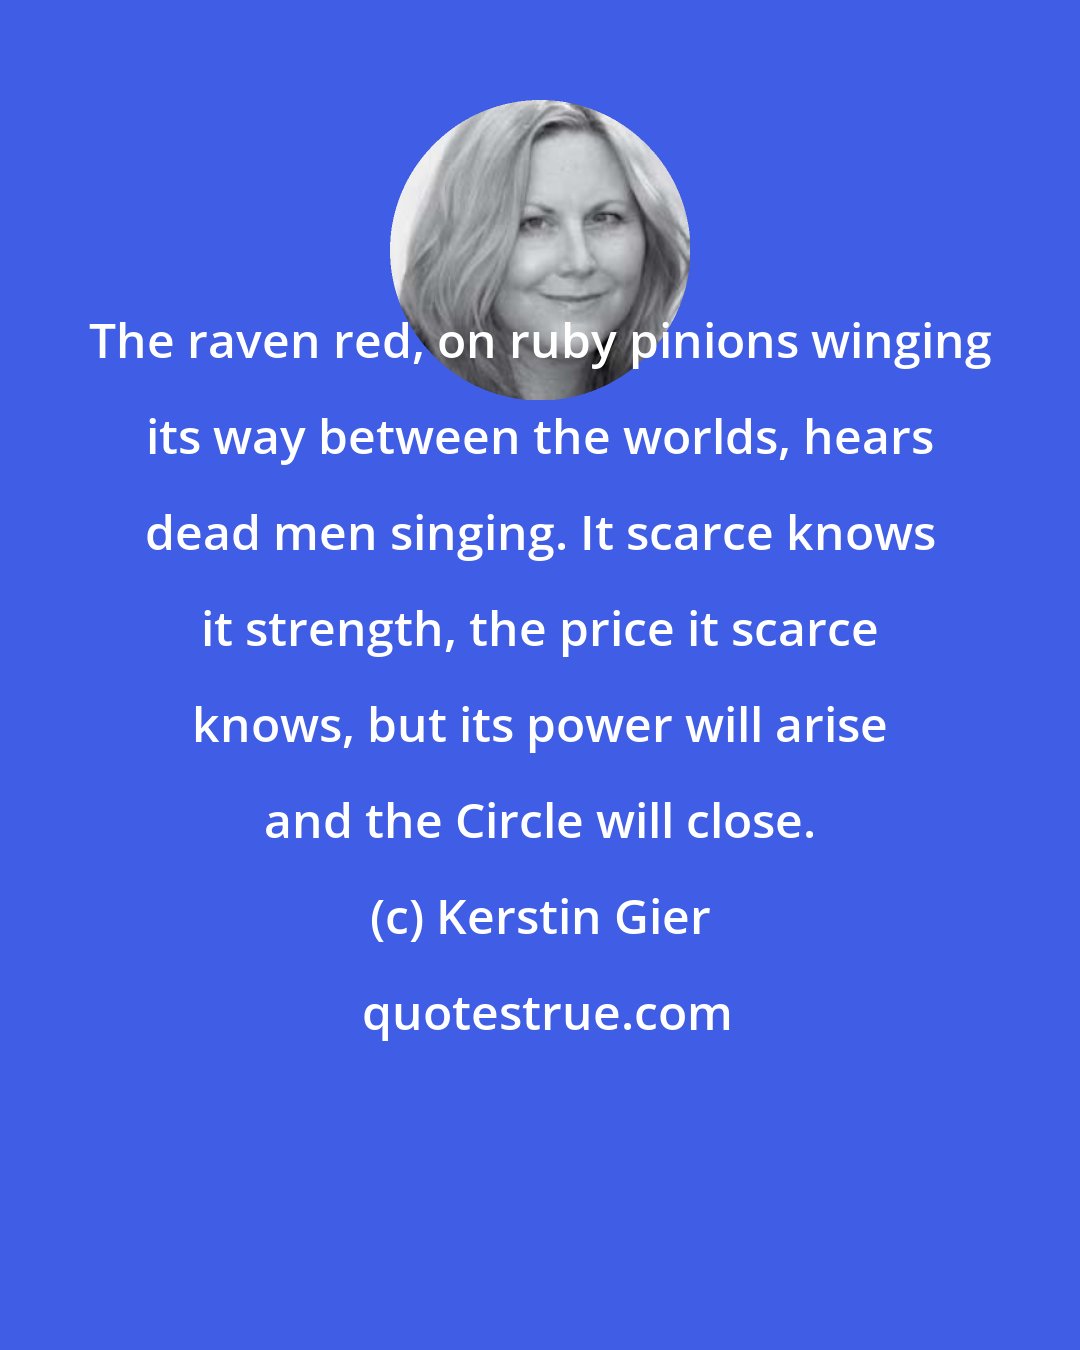 Kerstin Gier: The raven red, on ruby pinions winging its way between the worlds, hears dead men singing. It scarce knows it strength, the price it scarce knows, but its power will arise and the Circle will close.